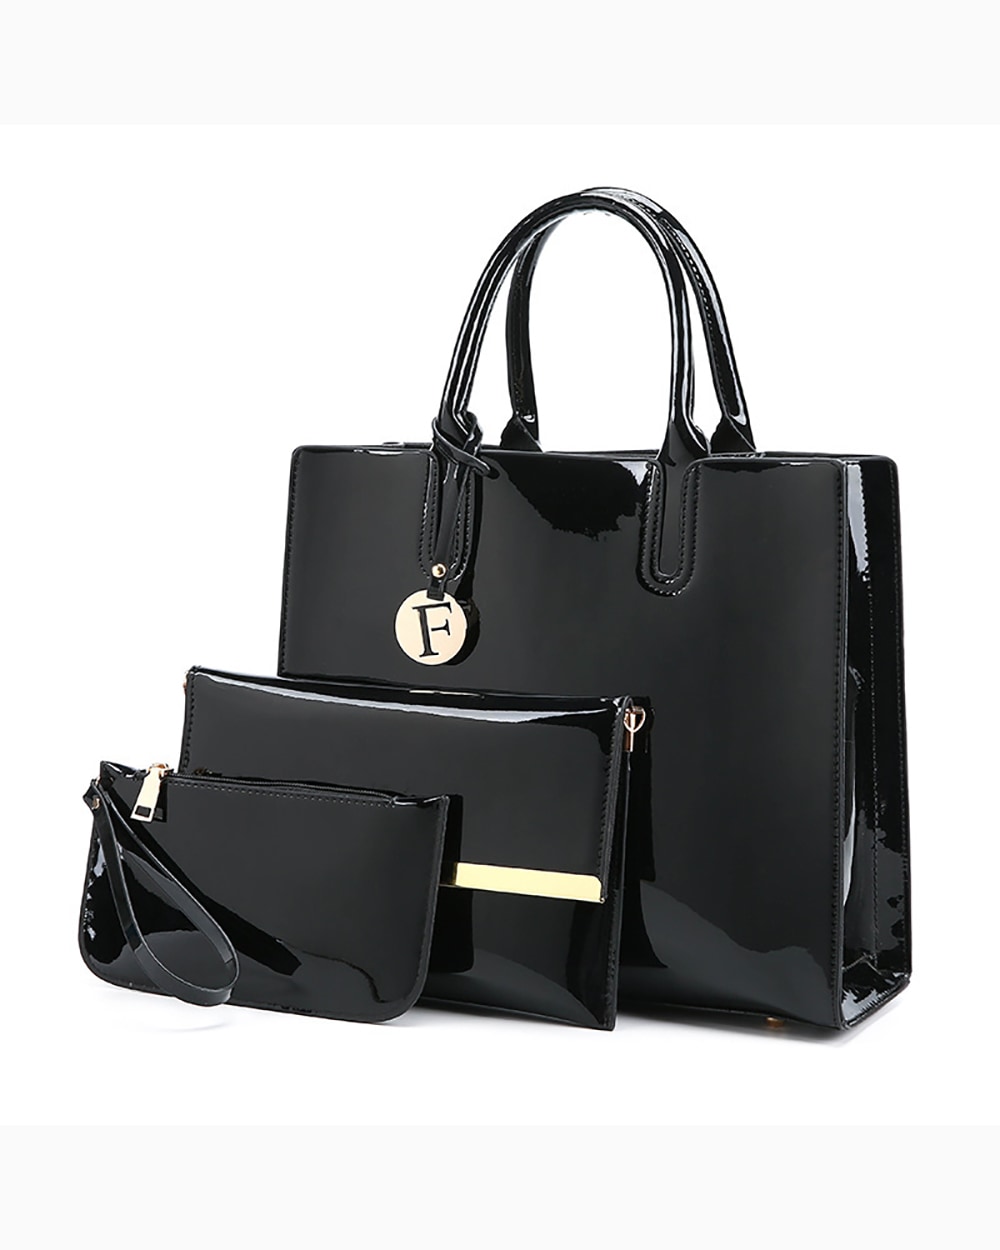 black 3 piece glossy leather tote bag